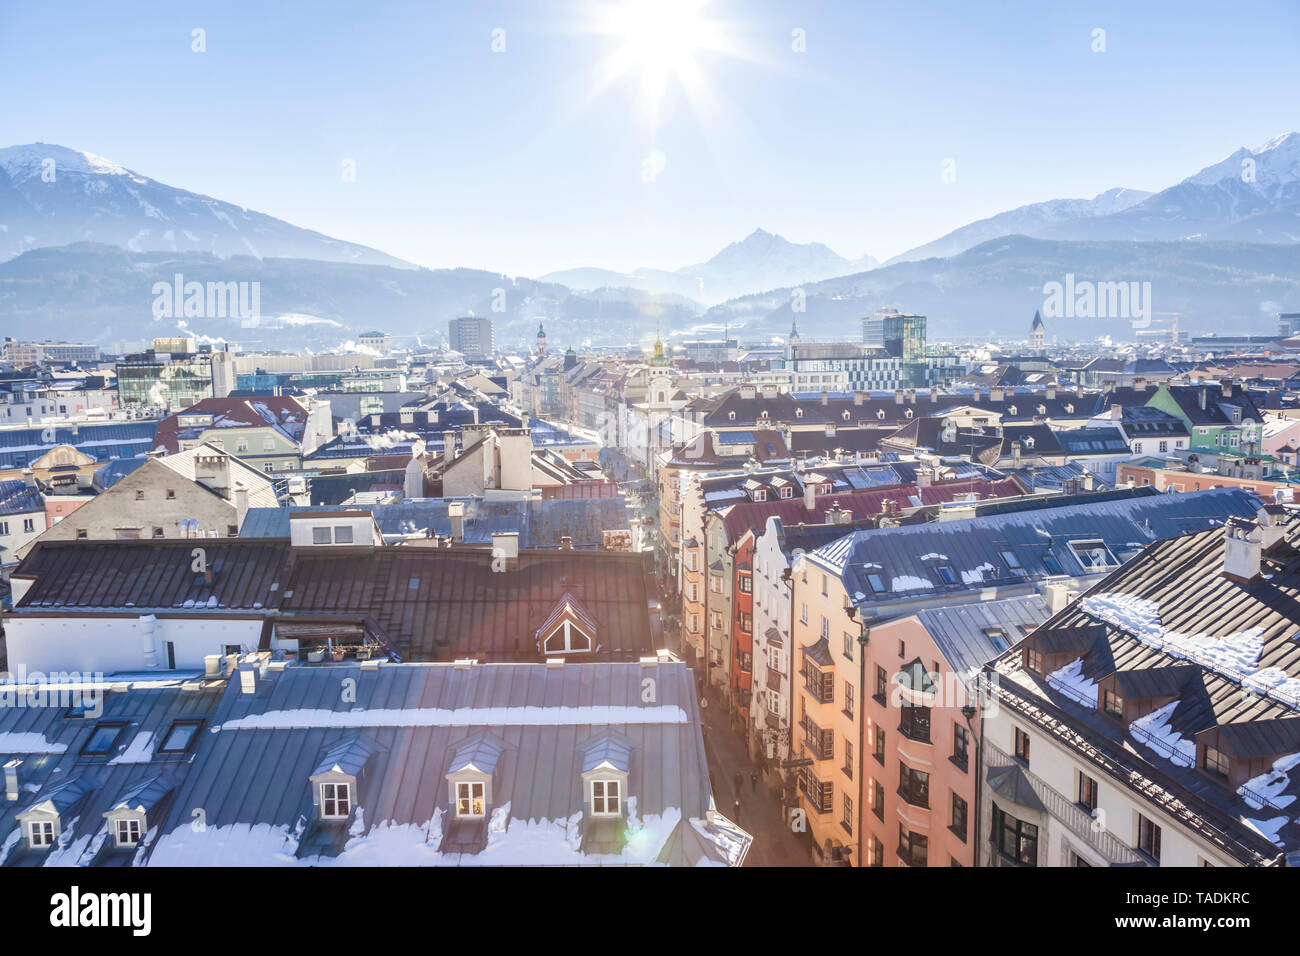 Austria, Tyrol, Innsbruck, Panoramic views of the city with snow-capped Alps in background Stock Photo